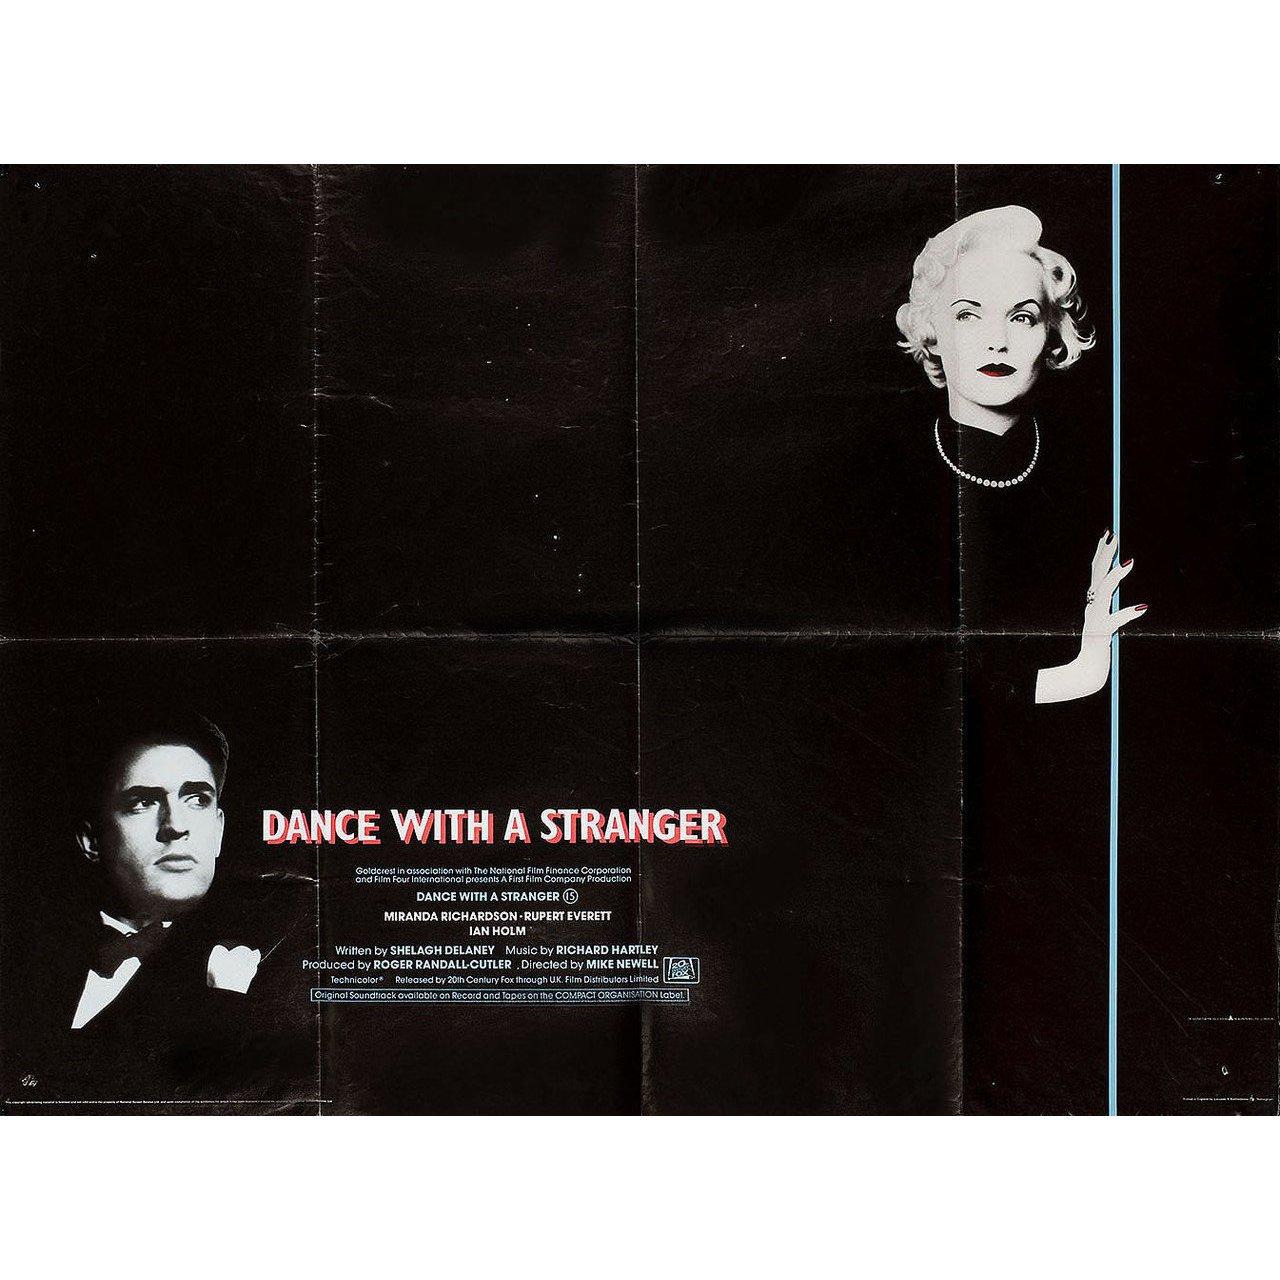 Original 1985 British quad poster for the film “Dance with a Stranger” directed by Mike Newell with Miranda Richardson / Rupert Everett / Ian Holm / Stratford Johns. Very good condition, folded. Many original posters were issued folded or were